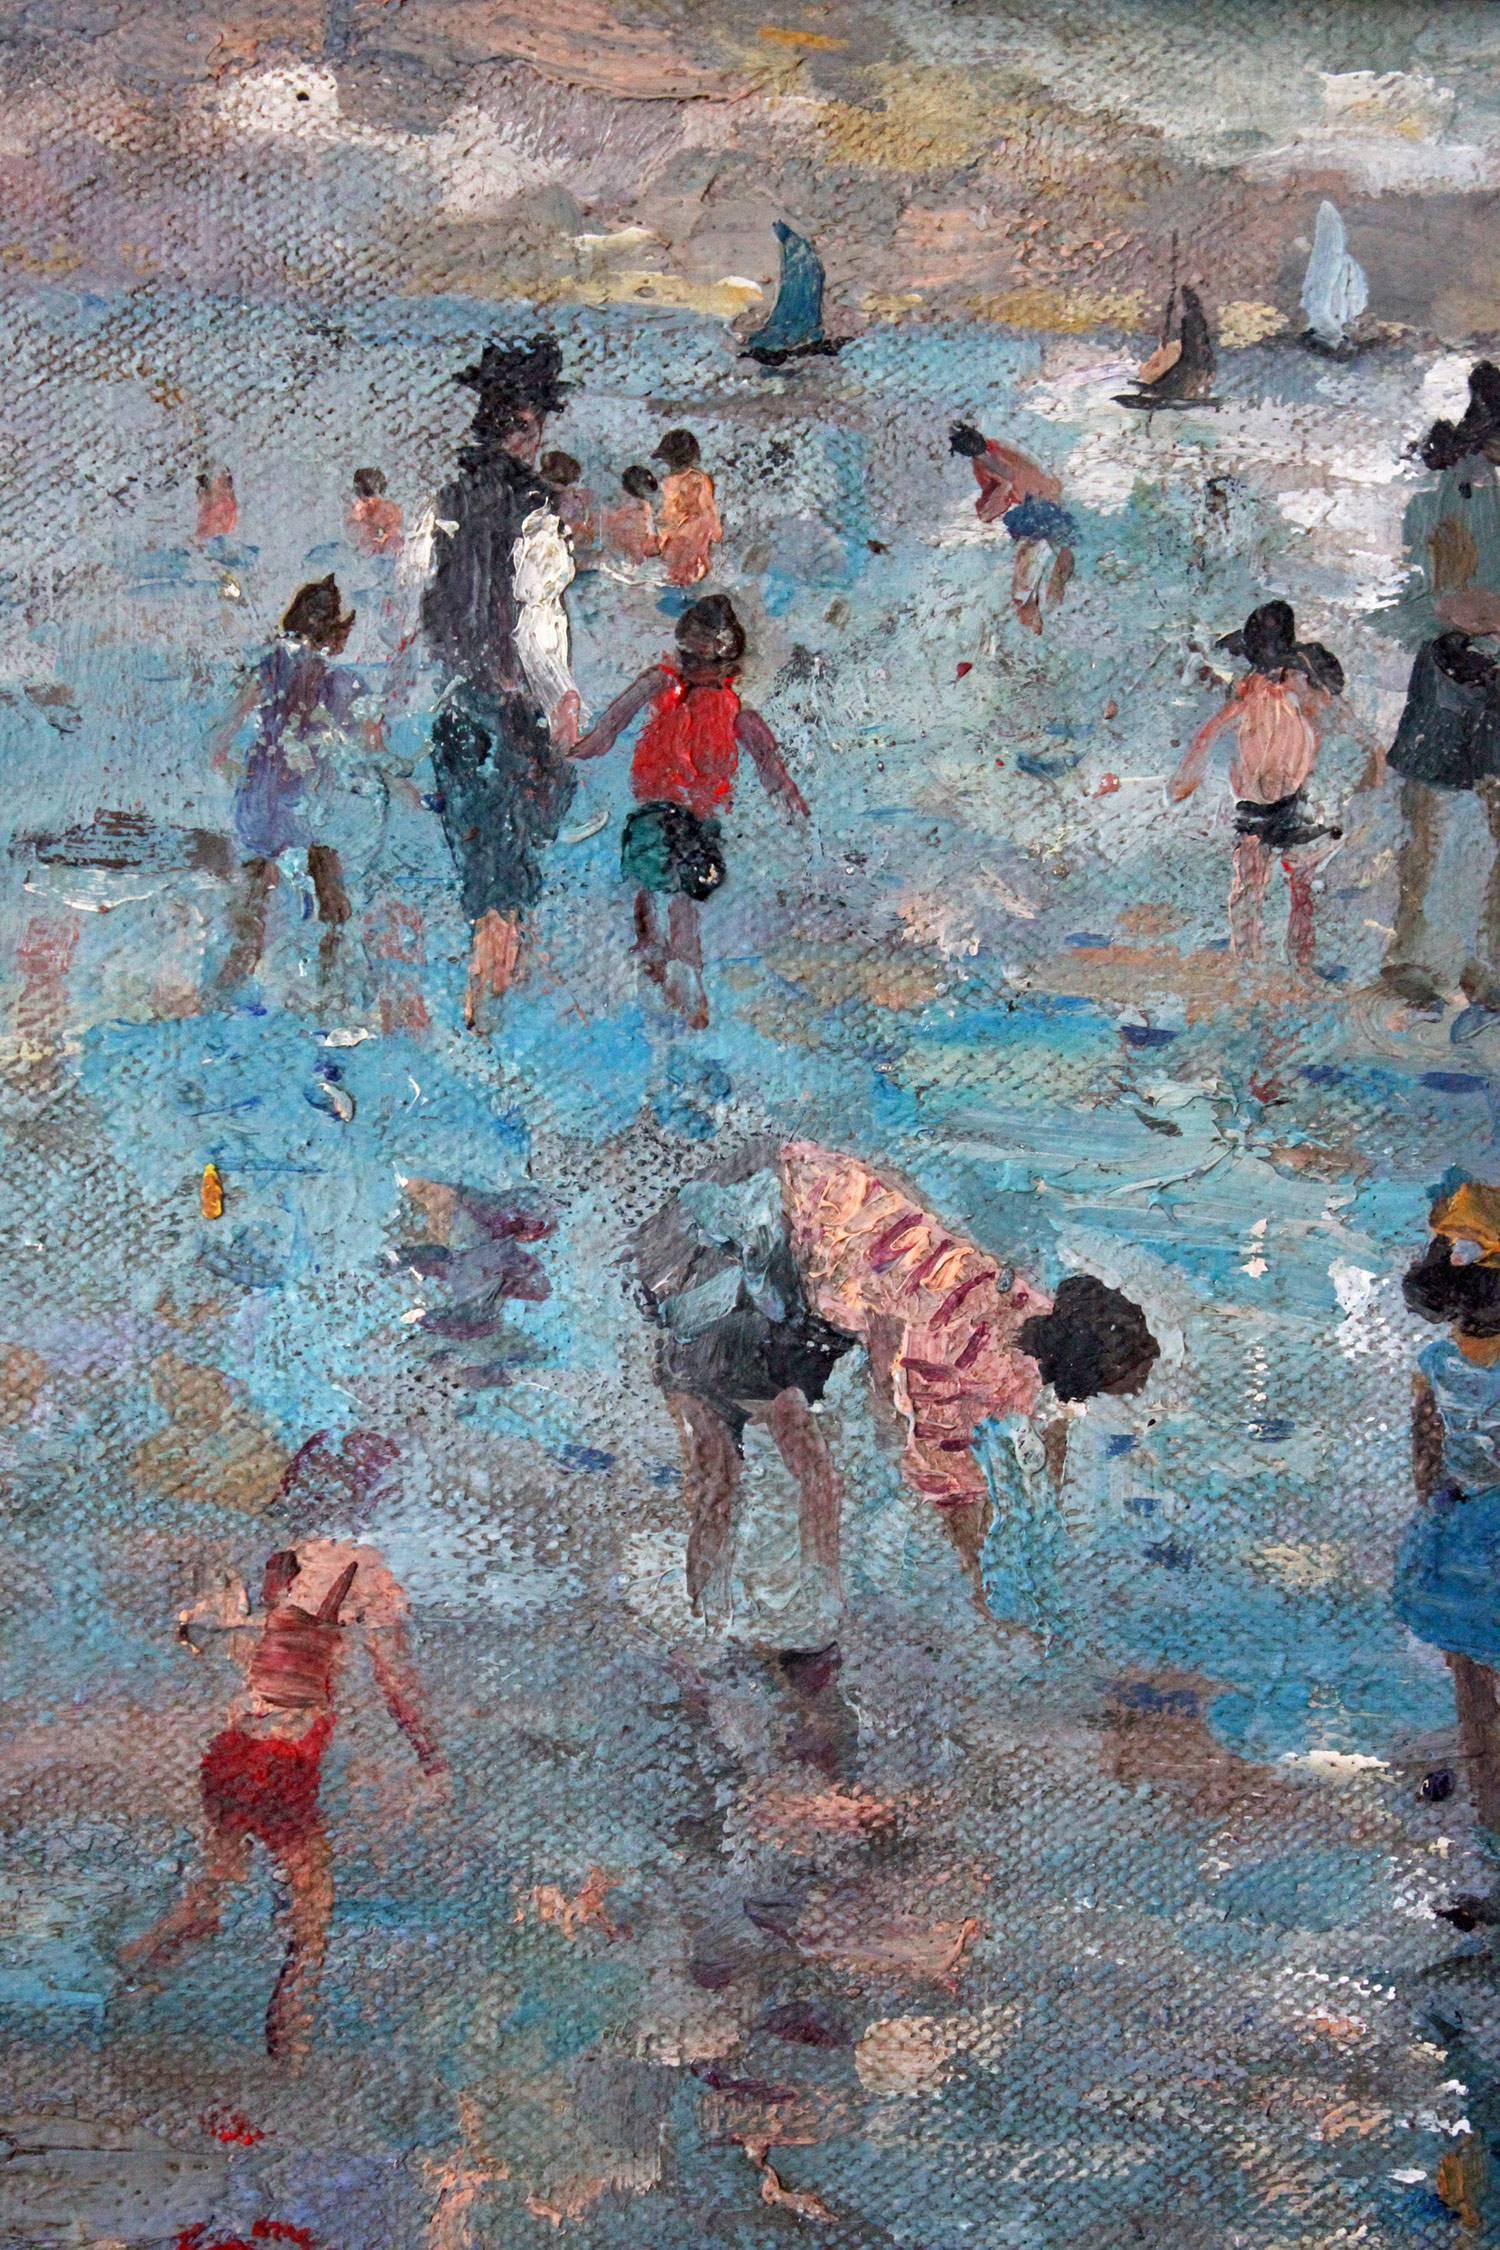 20th Century French Beach Scene with Figures - Brown Figurative Painting by Andre Hambourg